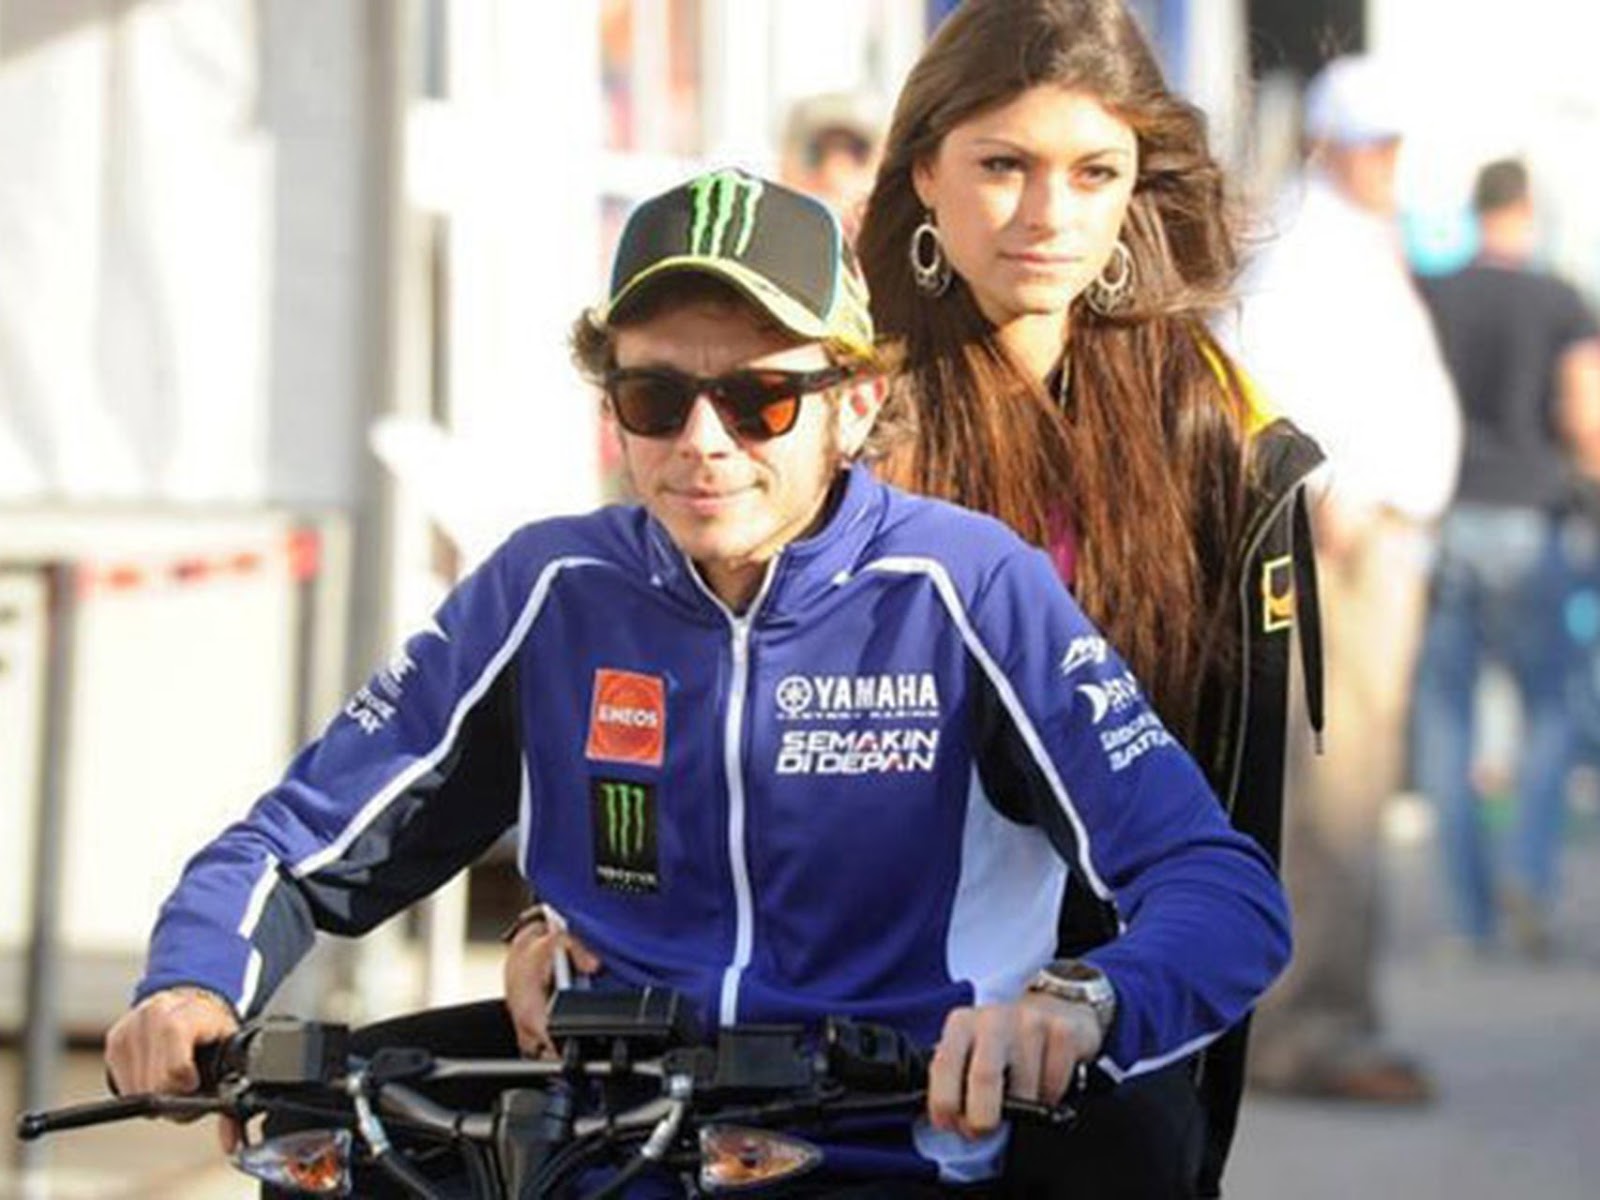 Who is Valentino Rossi's Wife or